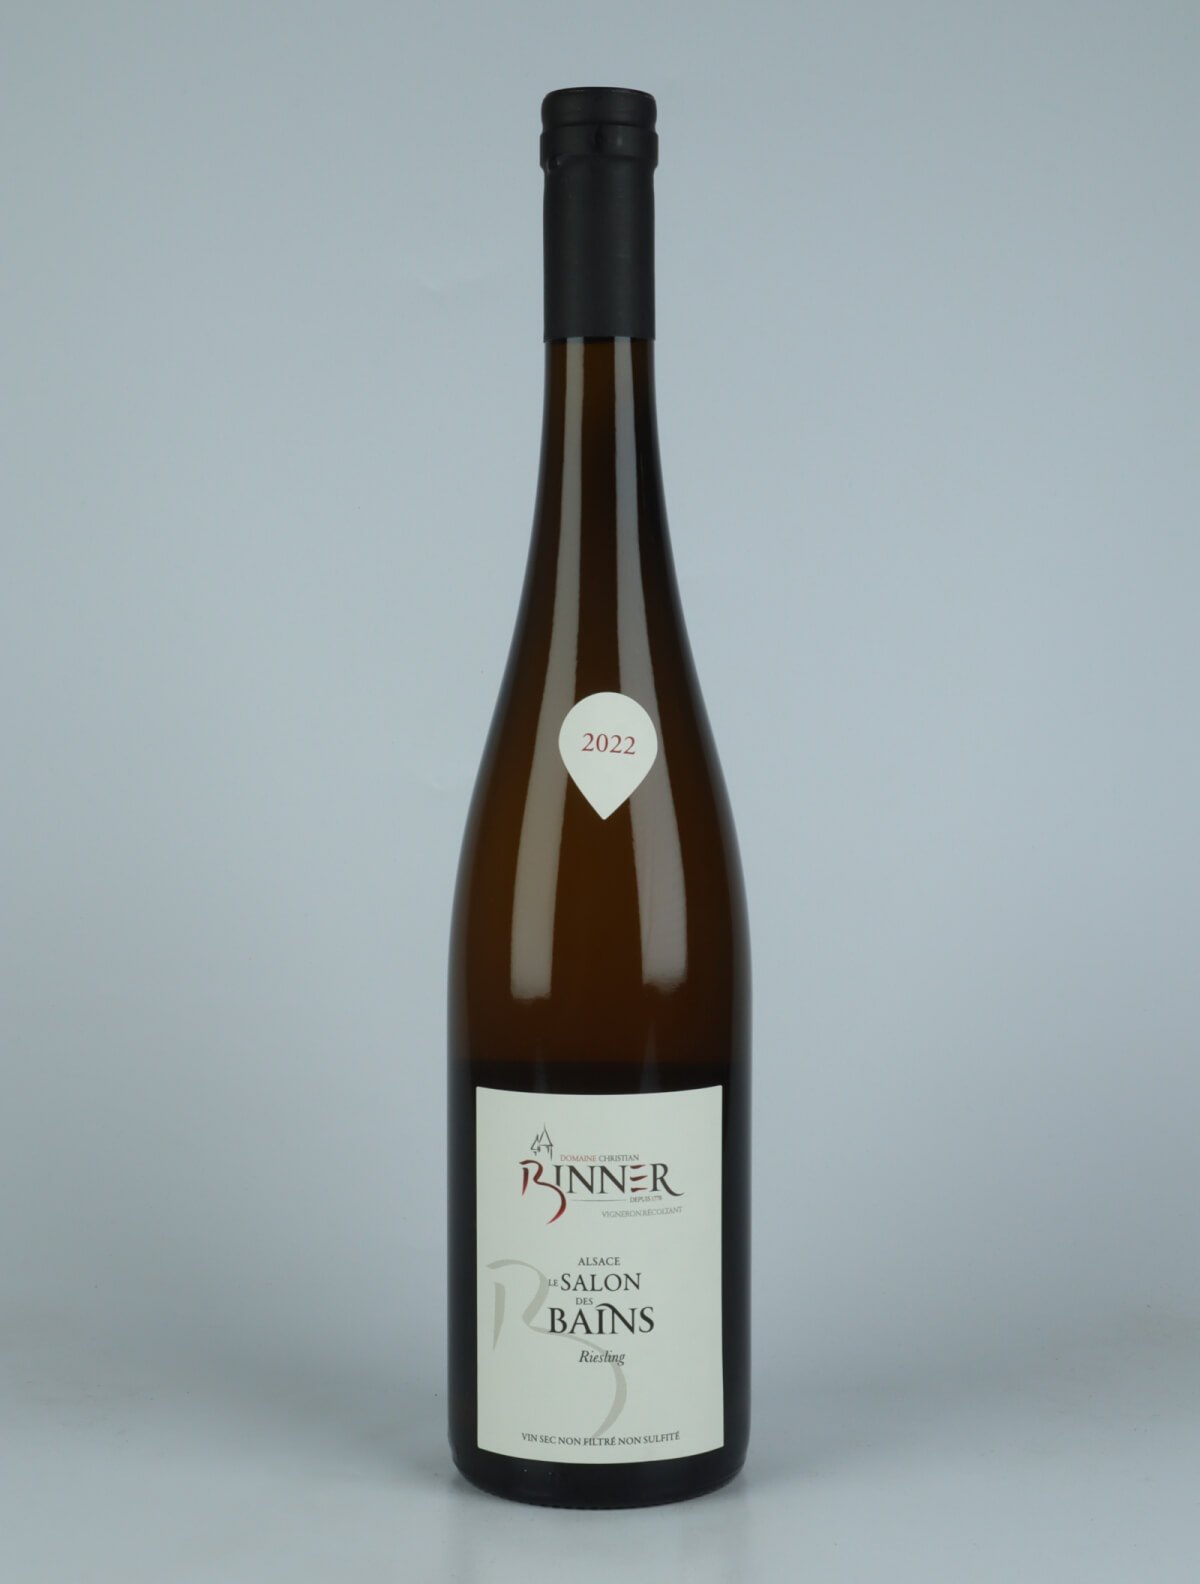 A bottle 2022 Riesling - Salon des Bains White wine from Domaine Christian Binner, Alsace in France